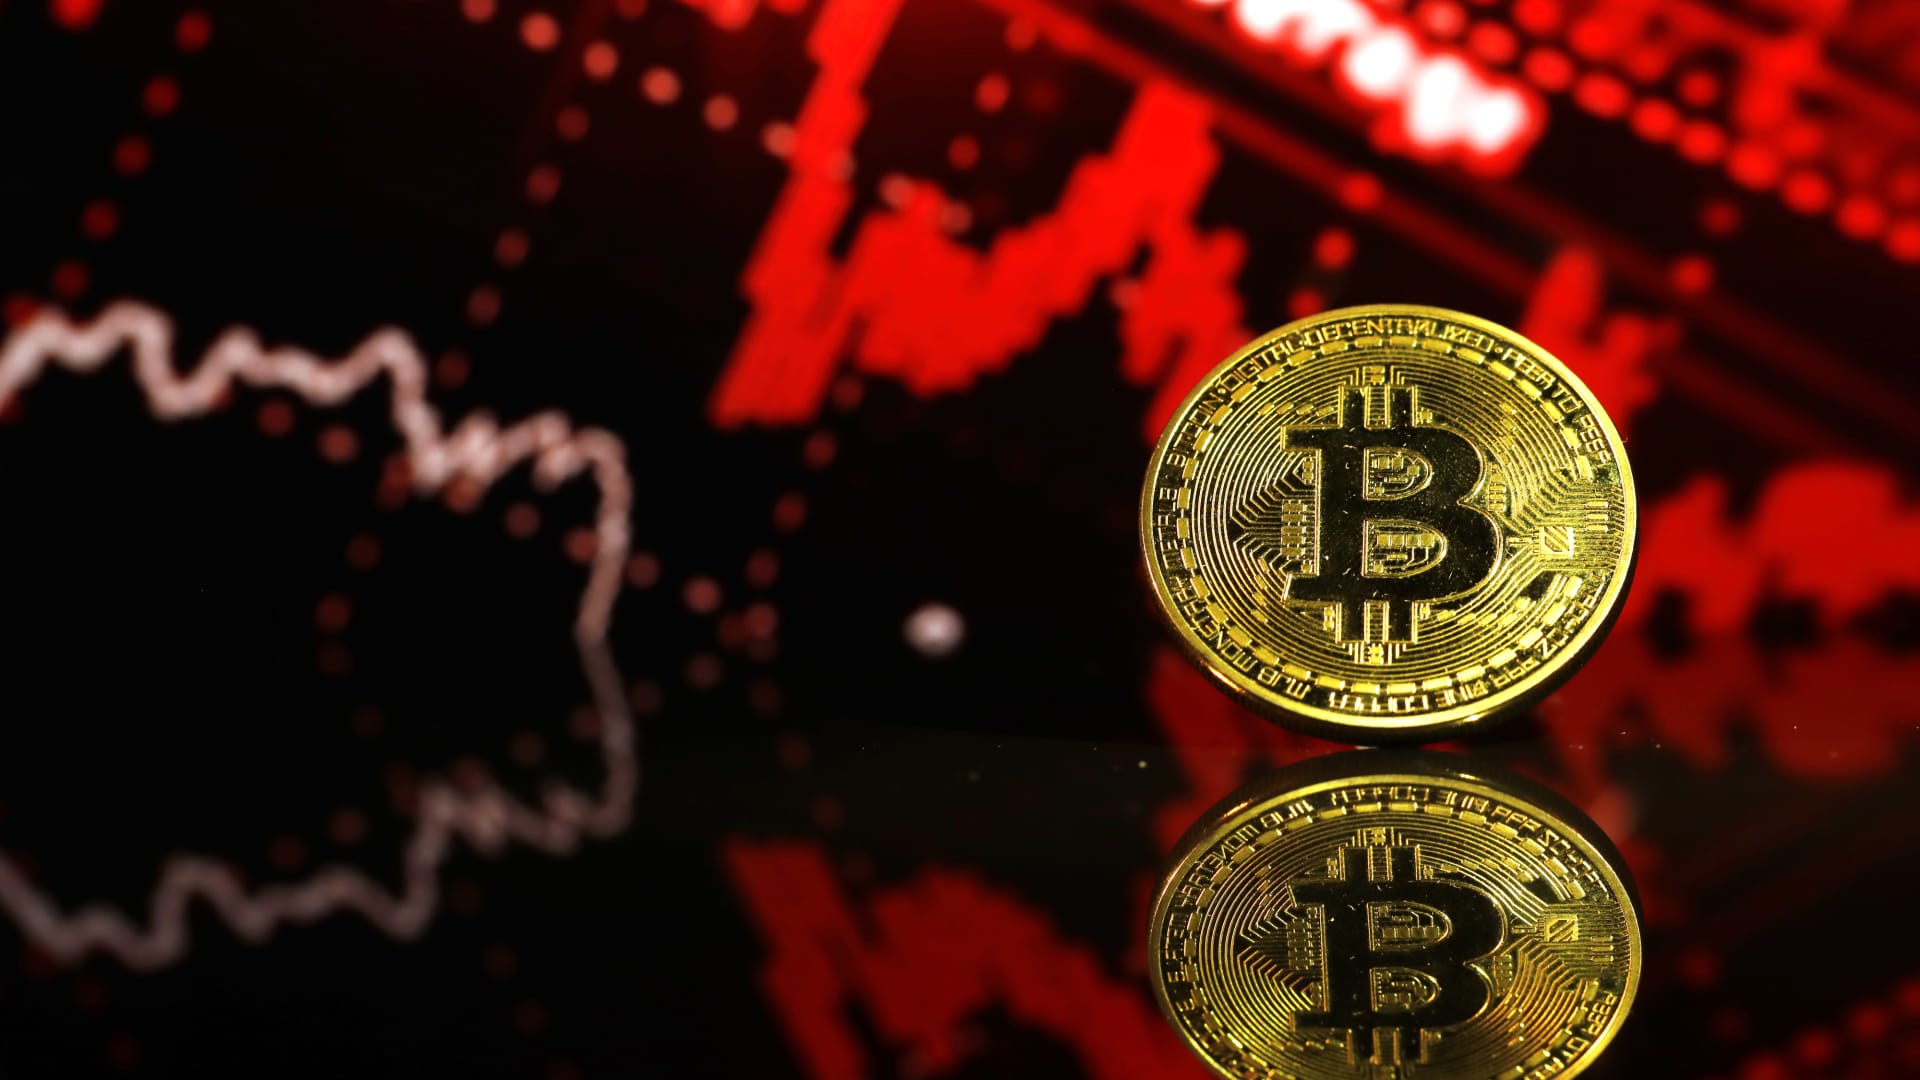 Bitcoin losses could steepen after the cryptocurrency breaks below $60,000, analysts say